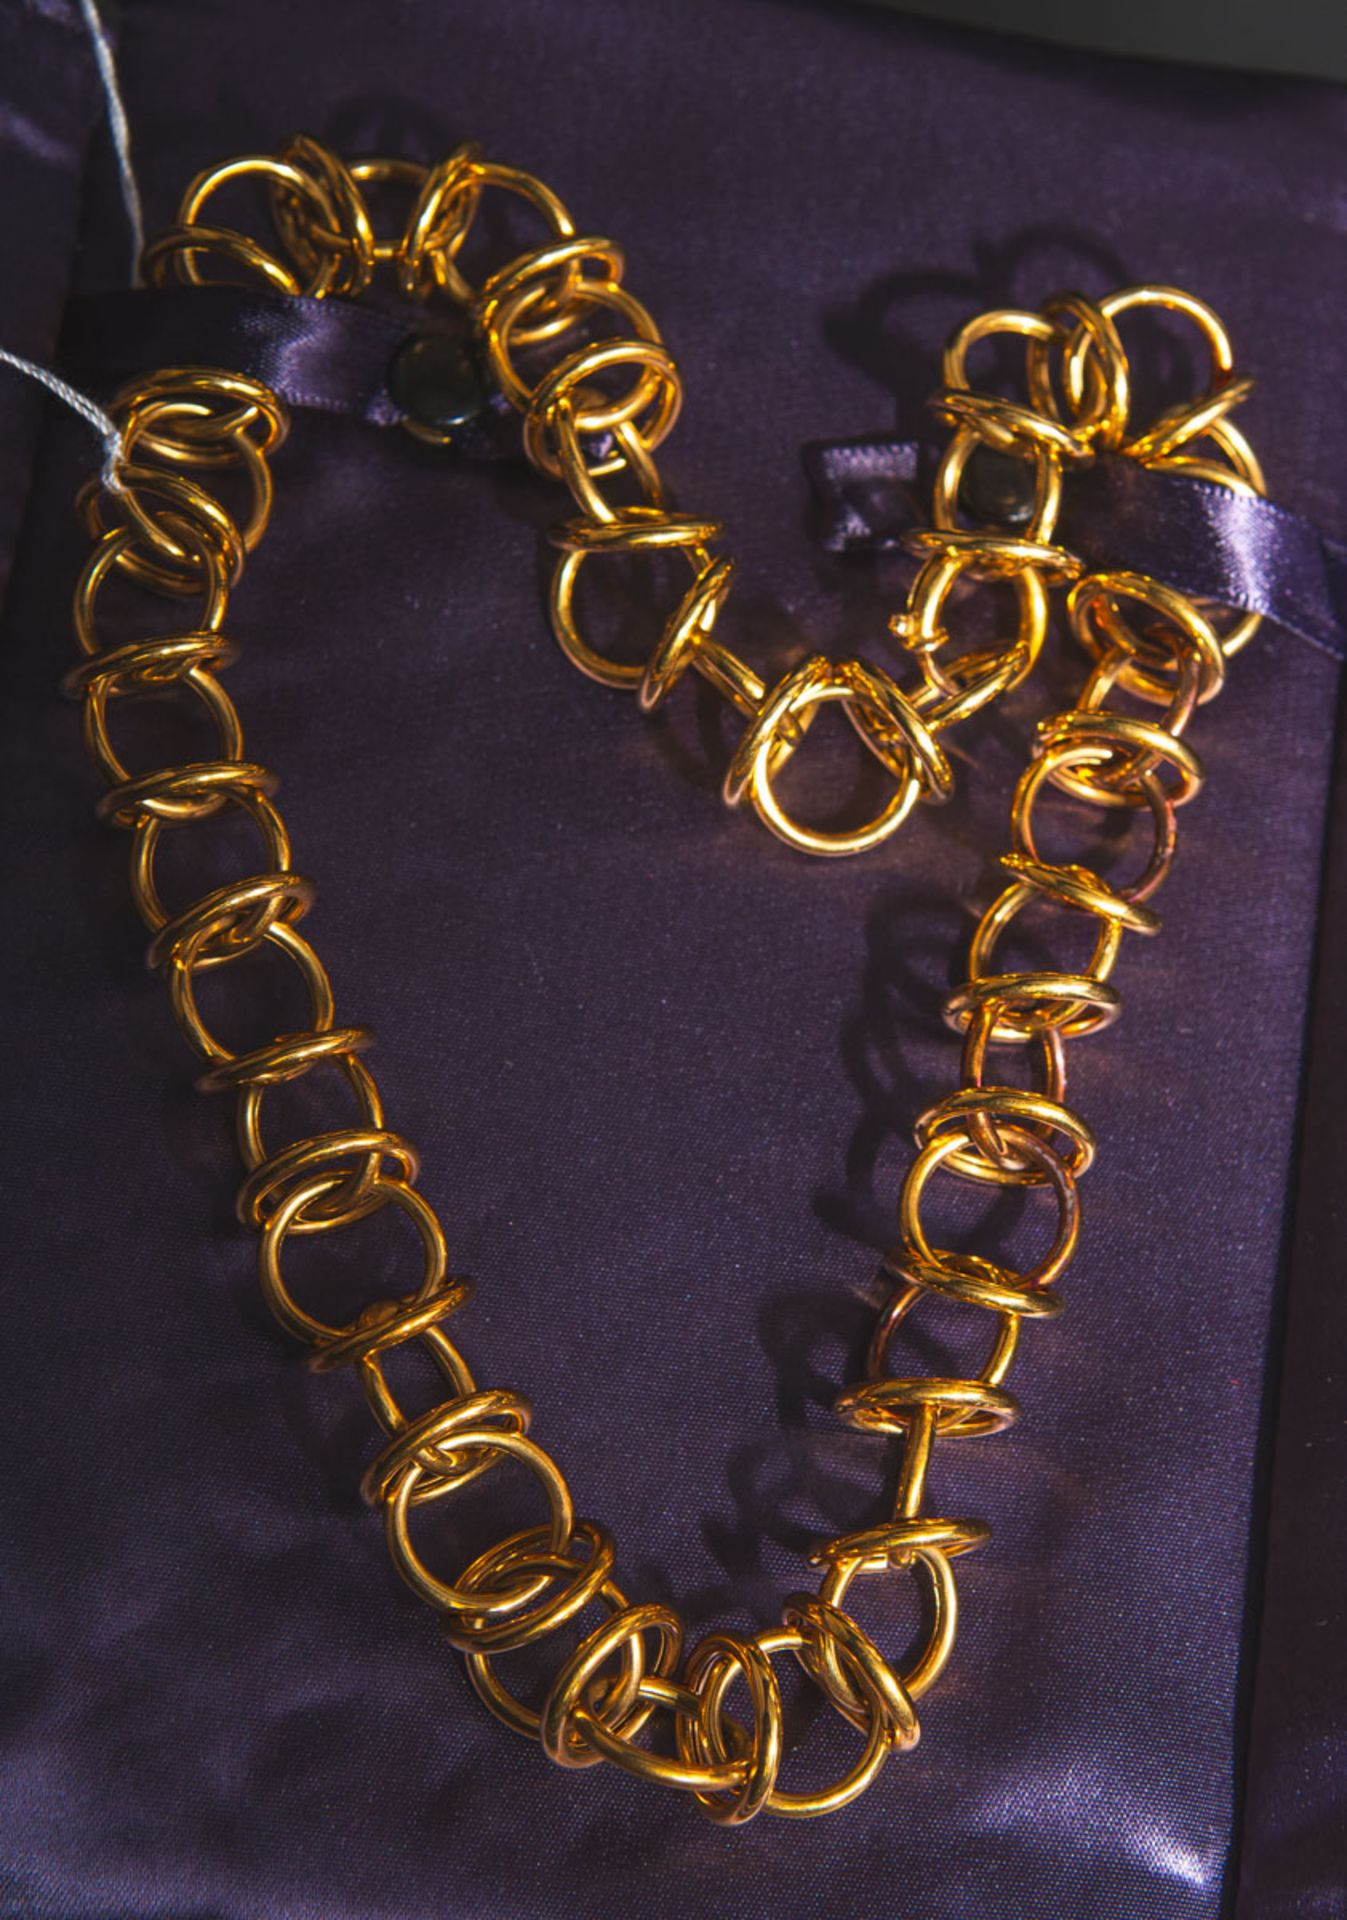 Collier "Connections" 750 GG (Tiffany & Co., Design: Paloma Picasso)